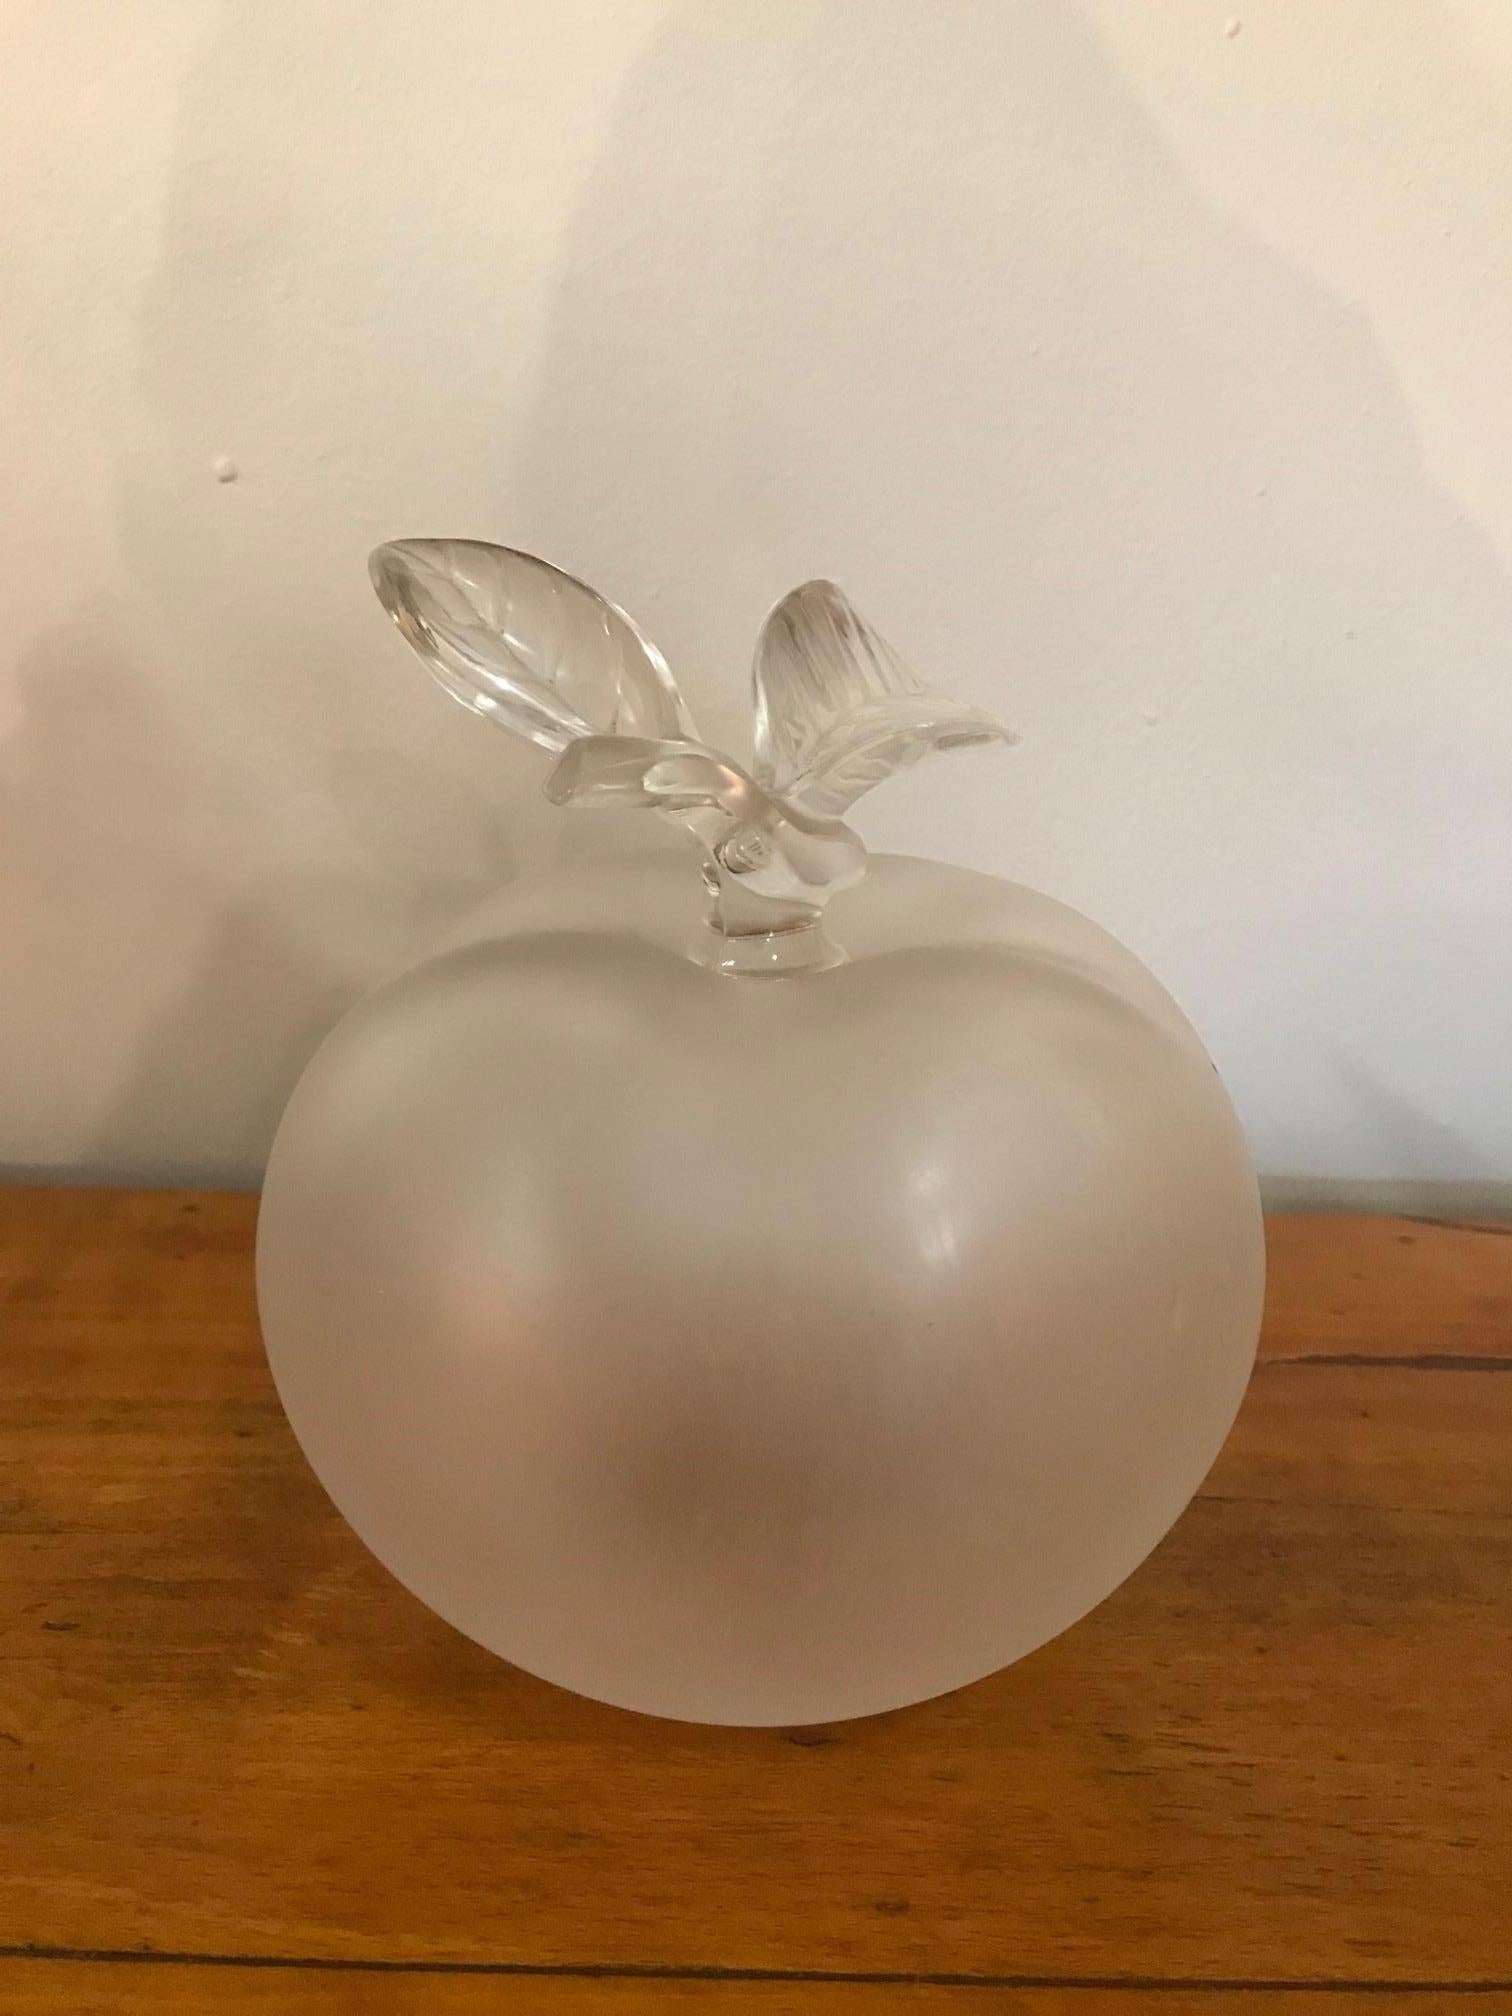 Beautiful 20th century French Lalique clear and frosted crystal Nina Ricci apple perfume bottle.
This wonderful perfume bottle has a frosted apple shaped body with clear leaf decorated stopper. The bottle is marked with etched 